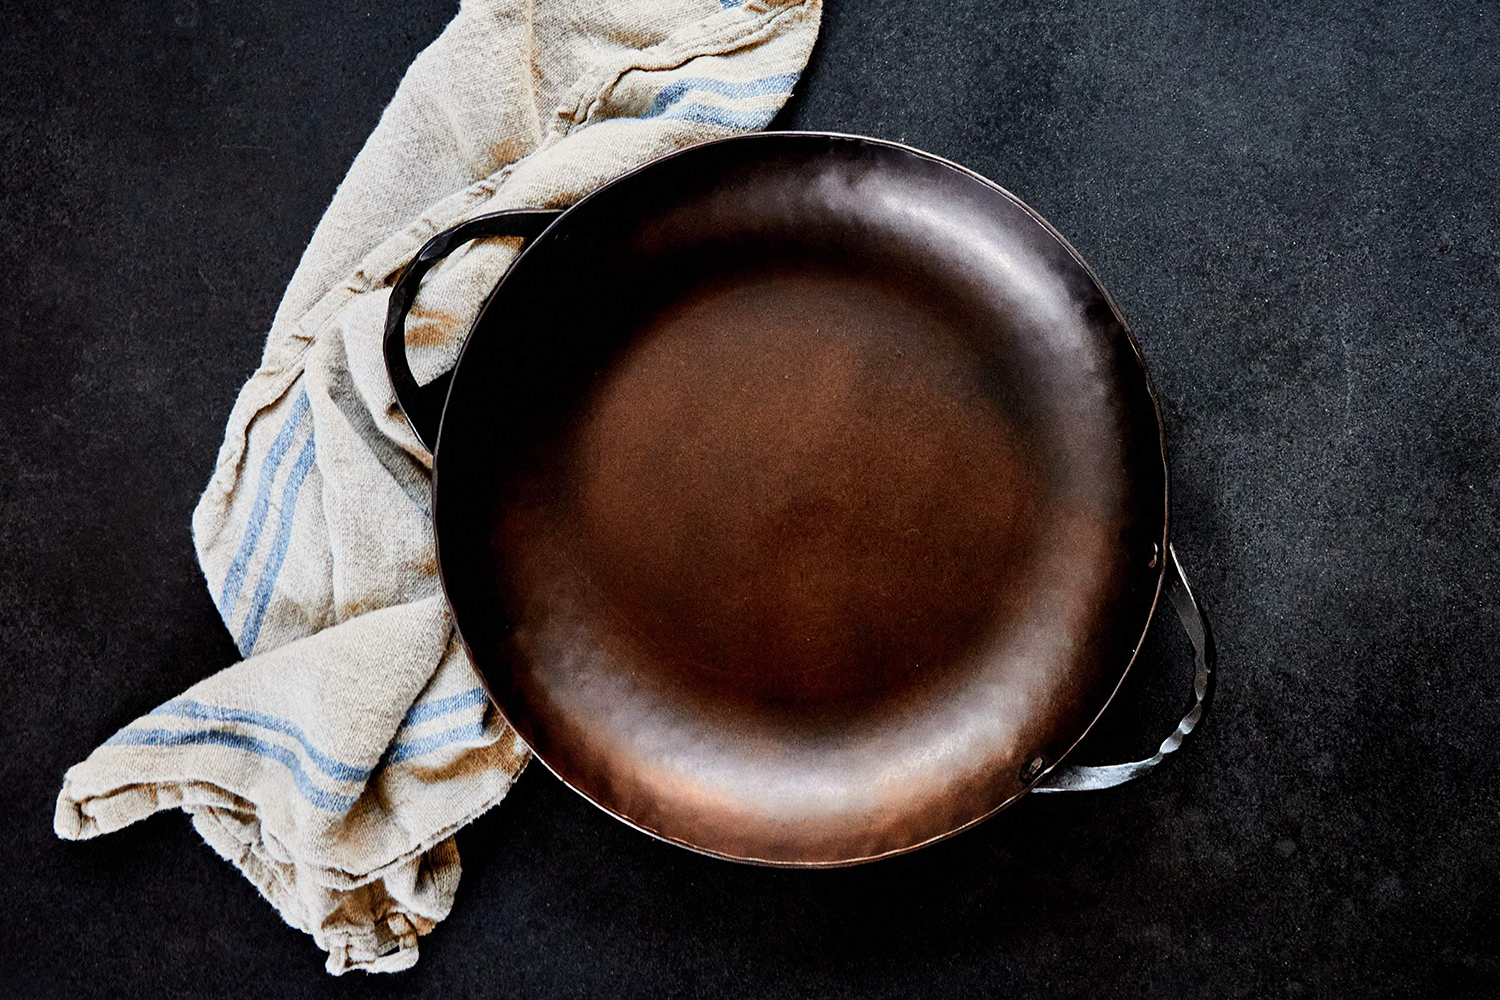 Best Cast Iron Skillets for Cooking - InsideHook